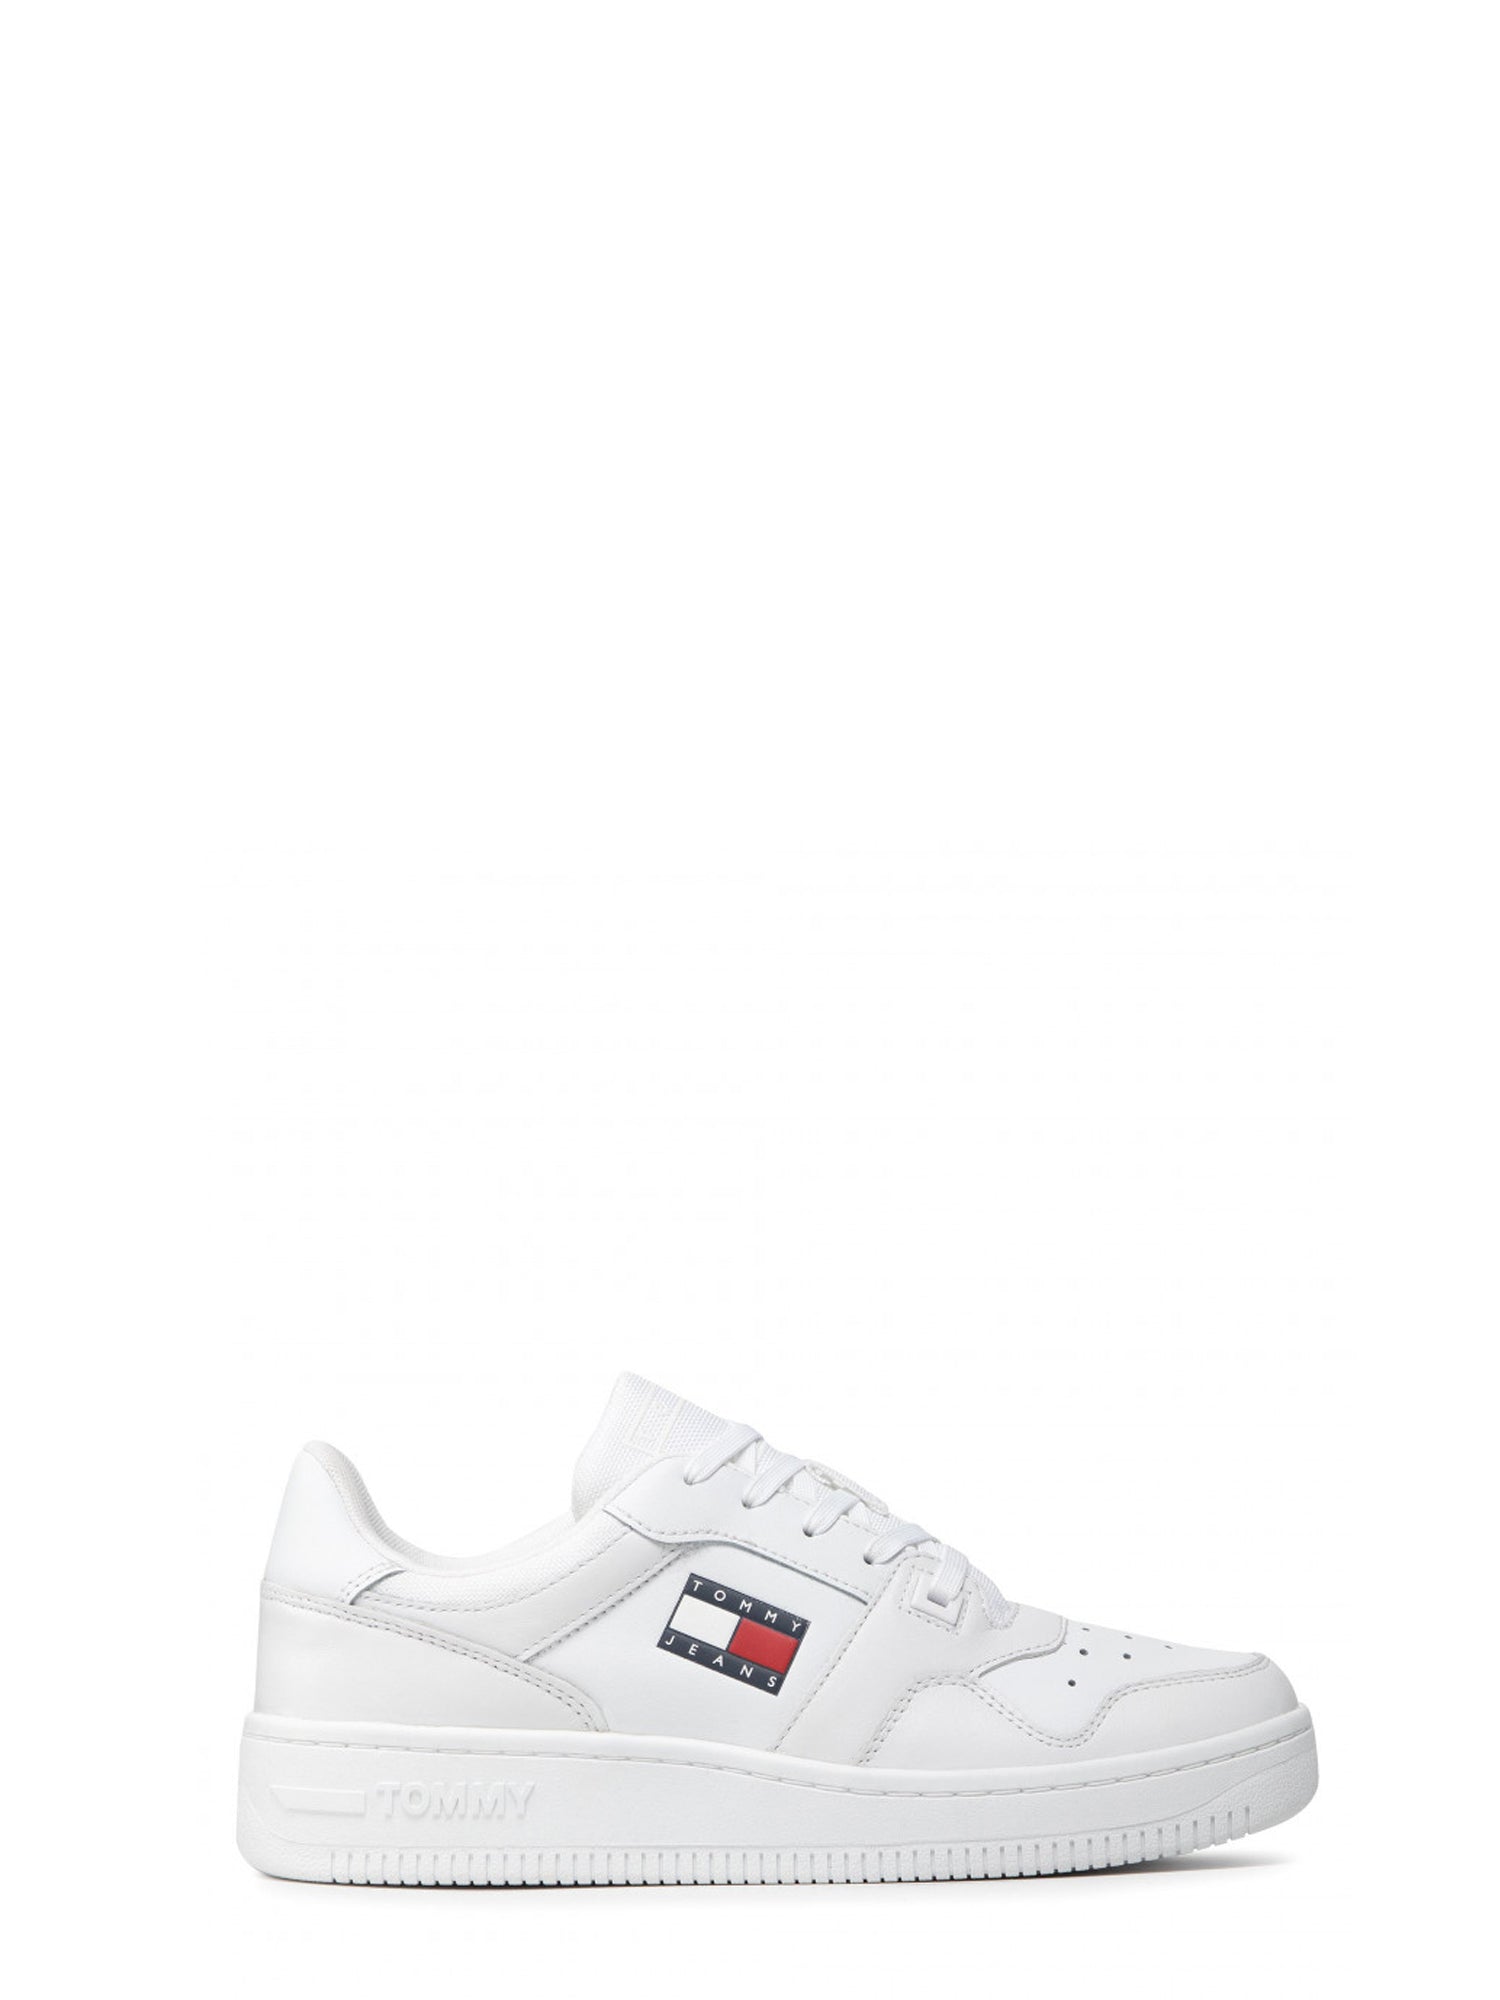 TOMMY HILFIGER SHOES SNEAKERS BASSE ESSENTIAL RÉTRO BIANCO